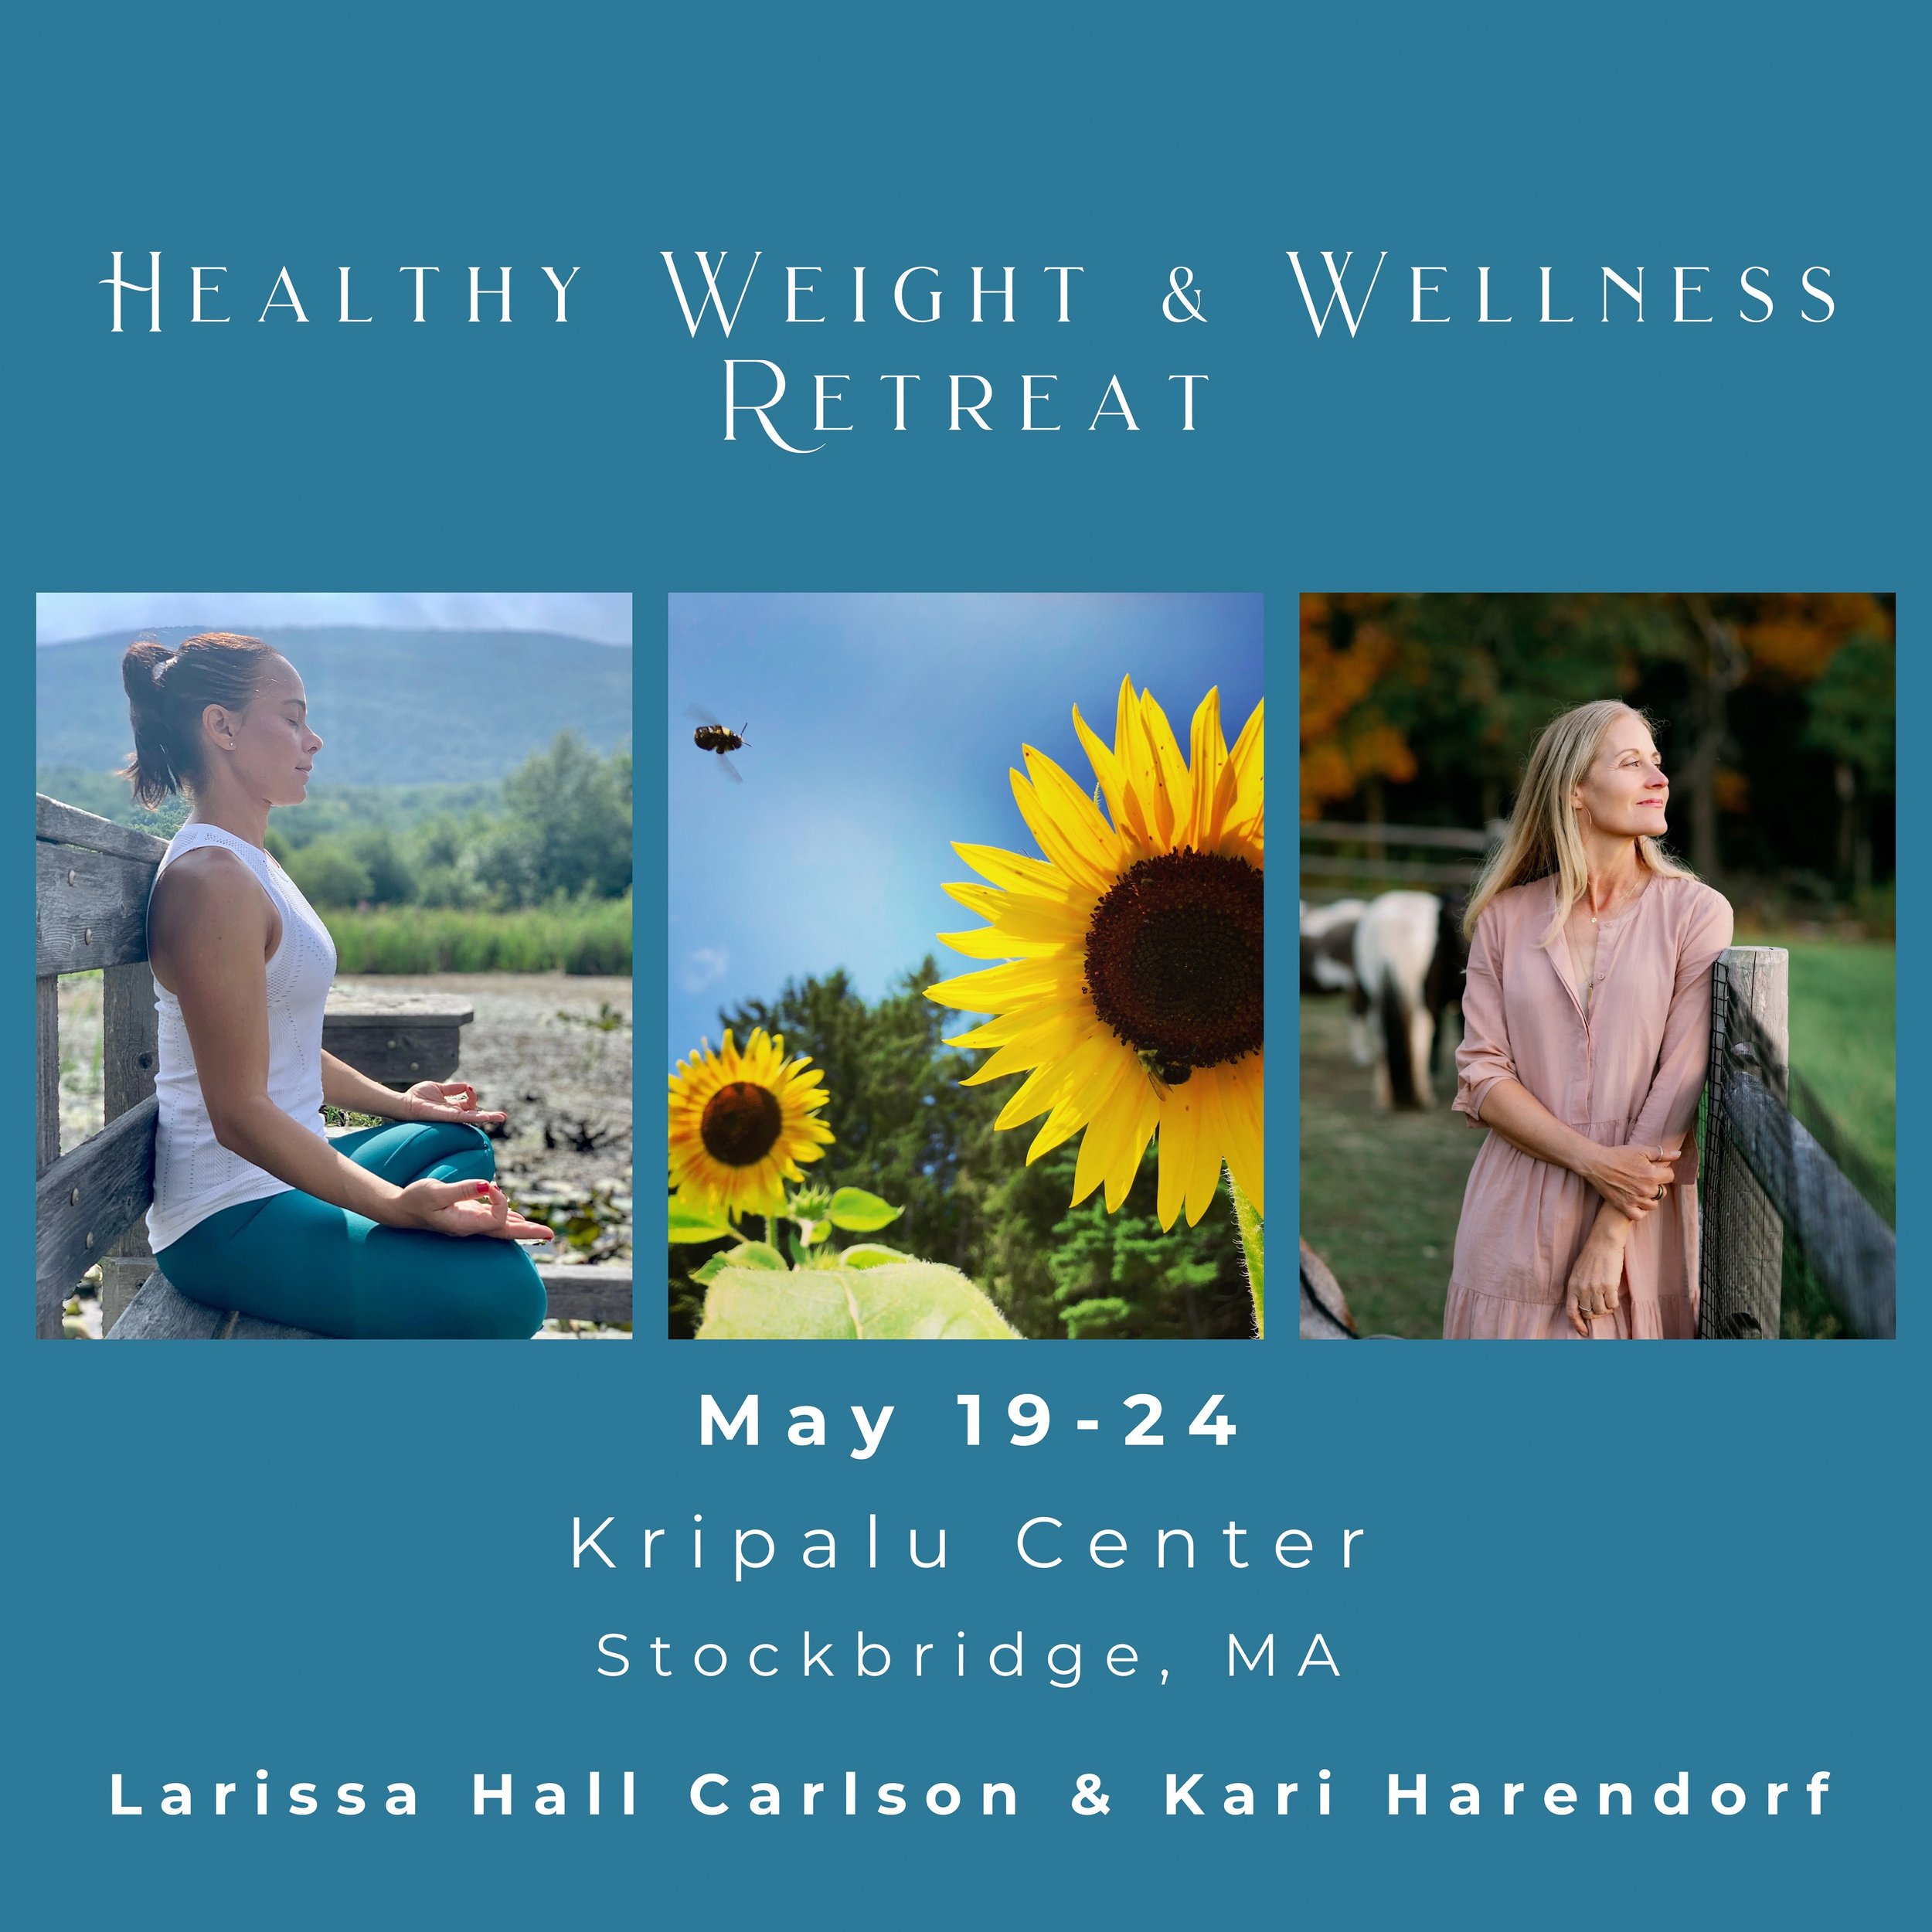 🩵 In peri-menopause or menopause and holding excess weight or water retention?

💙 Join us May 19-24 at Kripalu for a supportive and welcoming program filled with Ayurvedic tools to feel your best. 

🍏 Whether you consider yourself underweight, ove